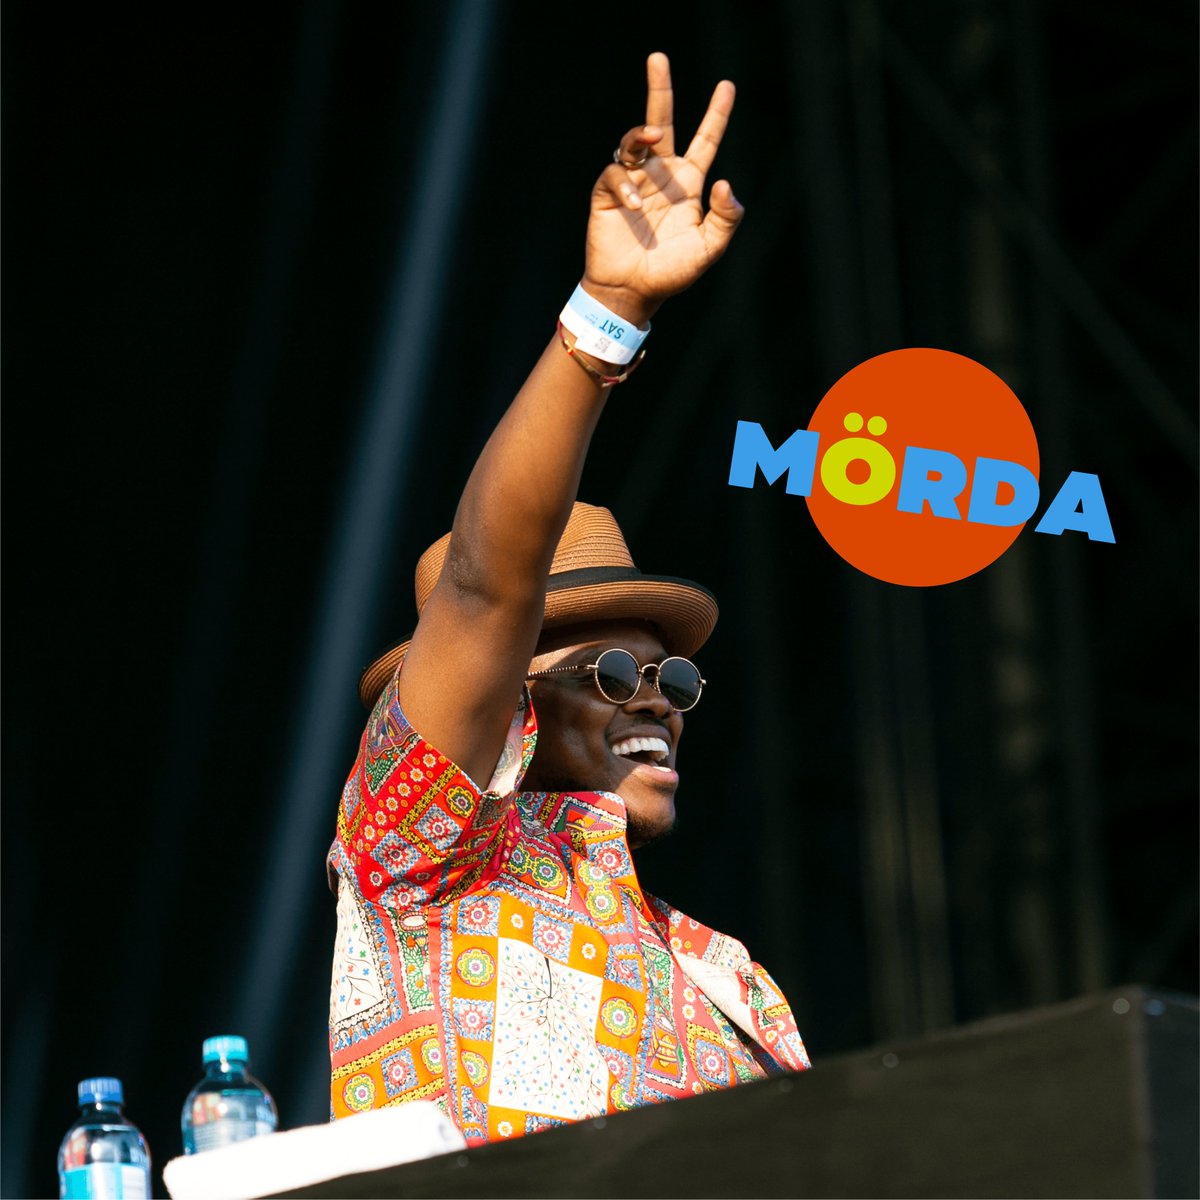 Reliving the electrifying moments from #DStvDeliciousFestival! Proudly South African artist #Morda set the stage ablaze with his incredible performance - unforgettable vibes that still have us dancing. #DStvDeliciousFestival #GPLifestyle #VisitGauteng